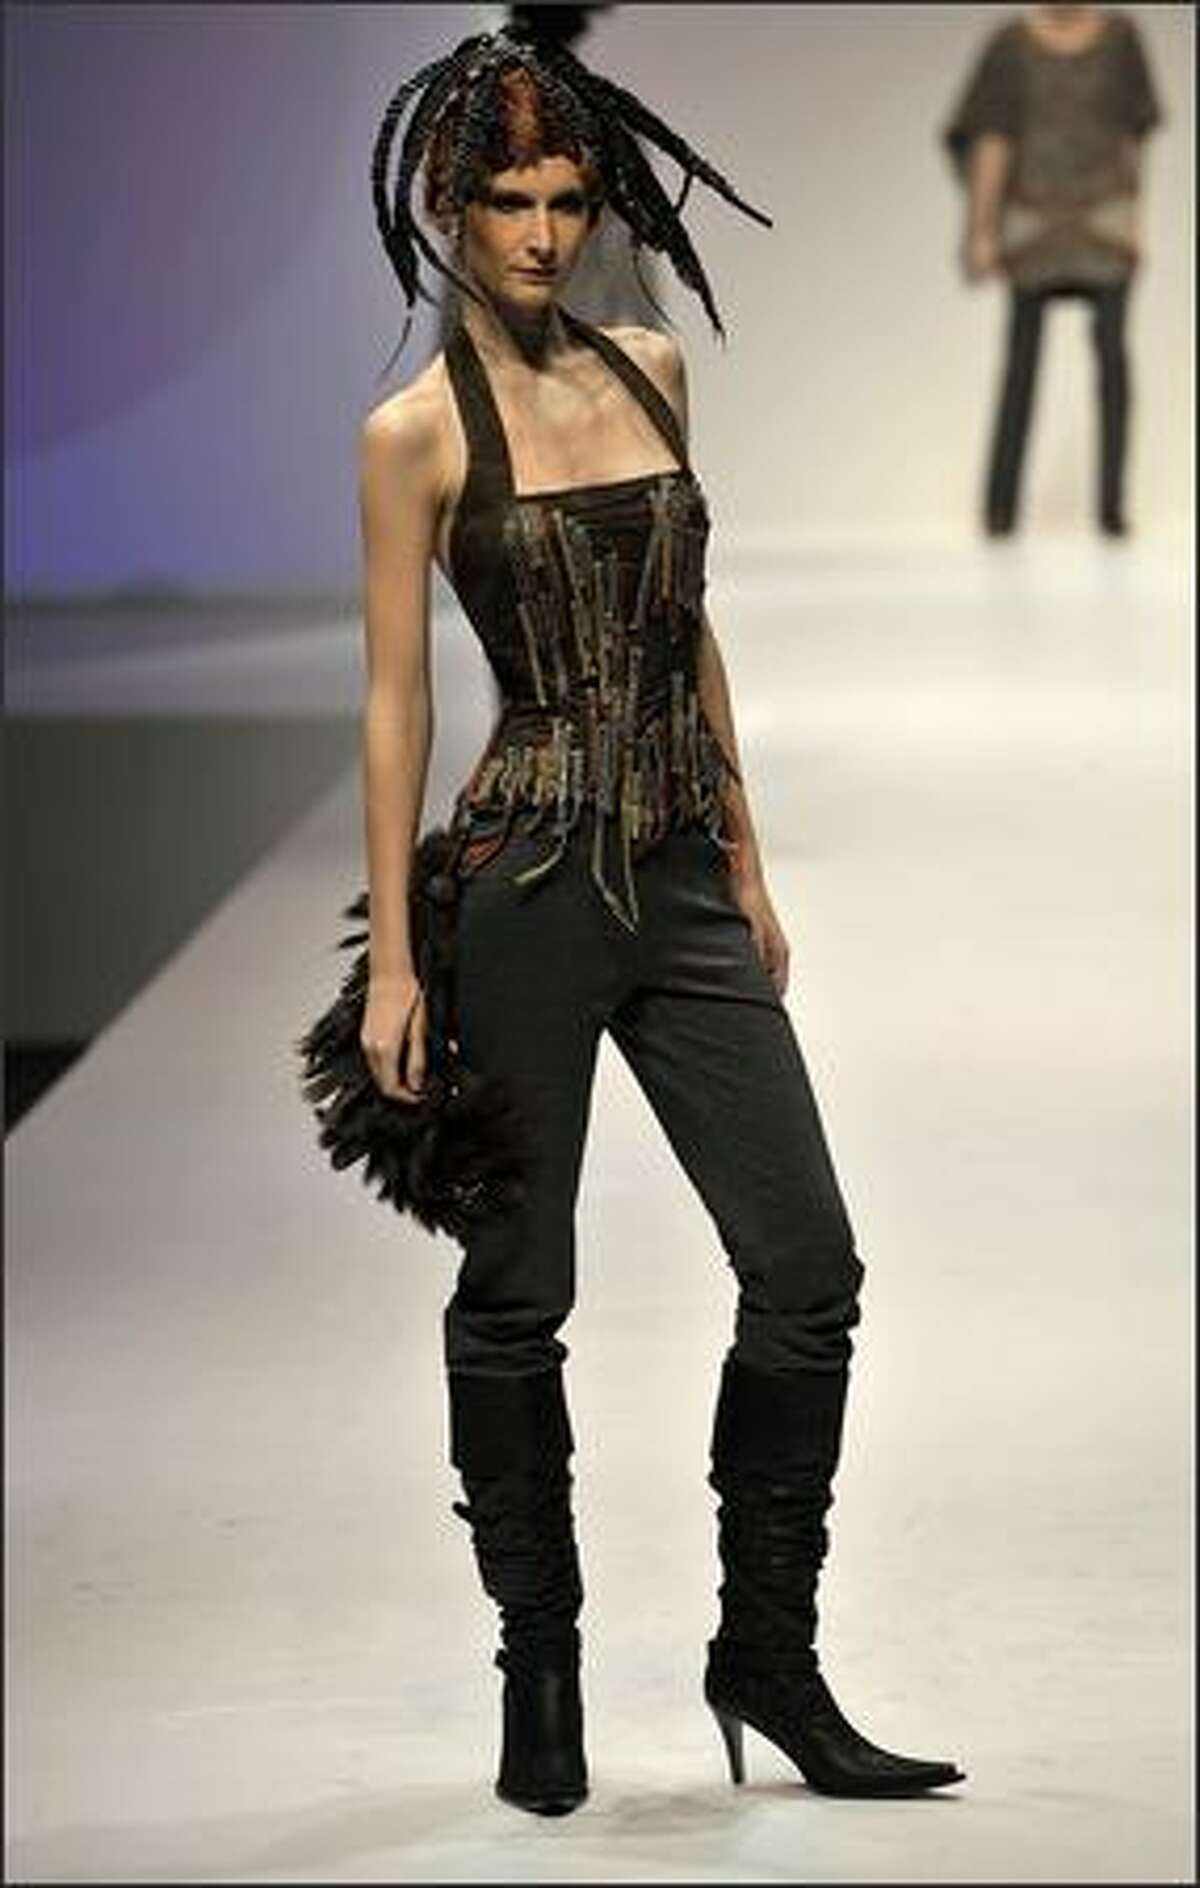 A model showcases designs on the catwalk by Ika on the second day of Hong Kong Fashion Week Autumn/Winter 2008, at Hong Kong Convention & Exhibition Centre (HKCEC) on Tuesday in Hong Kong, China.